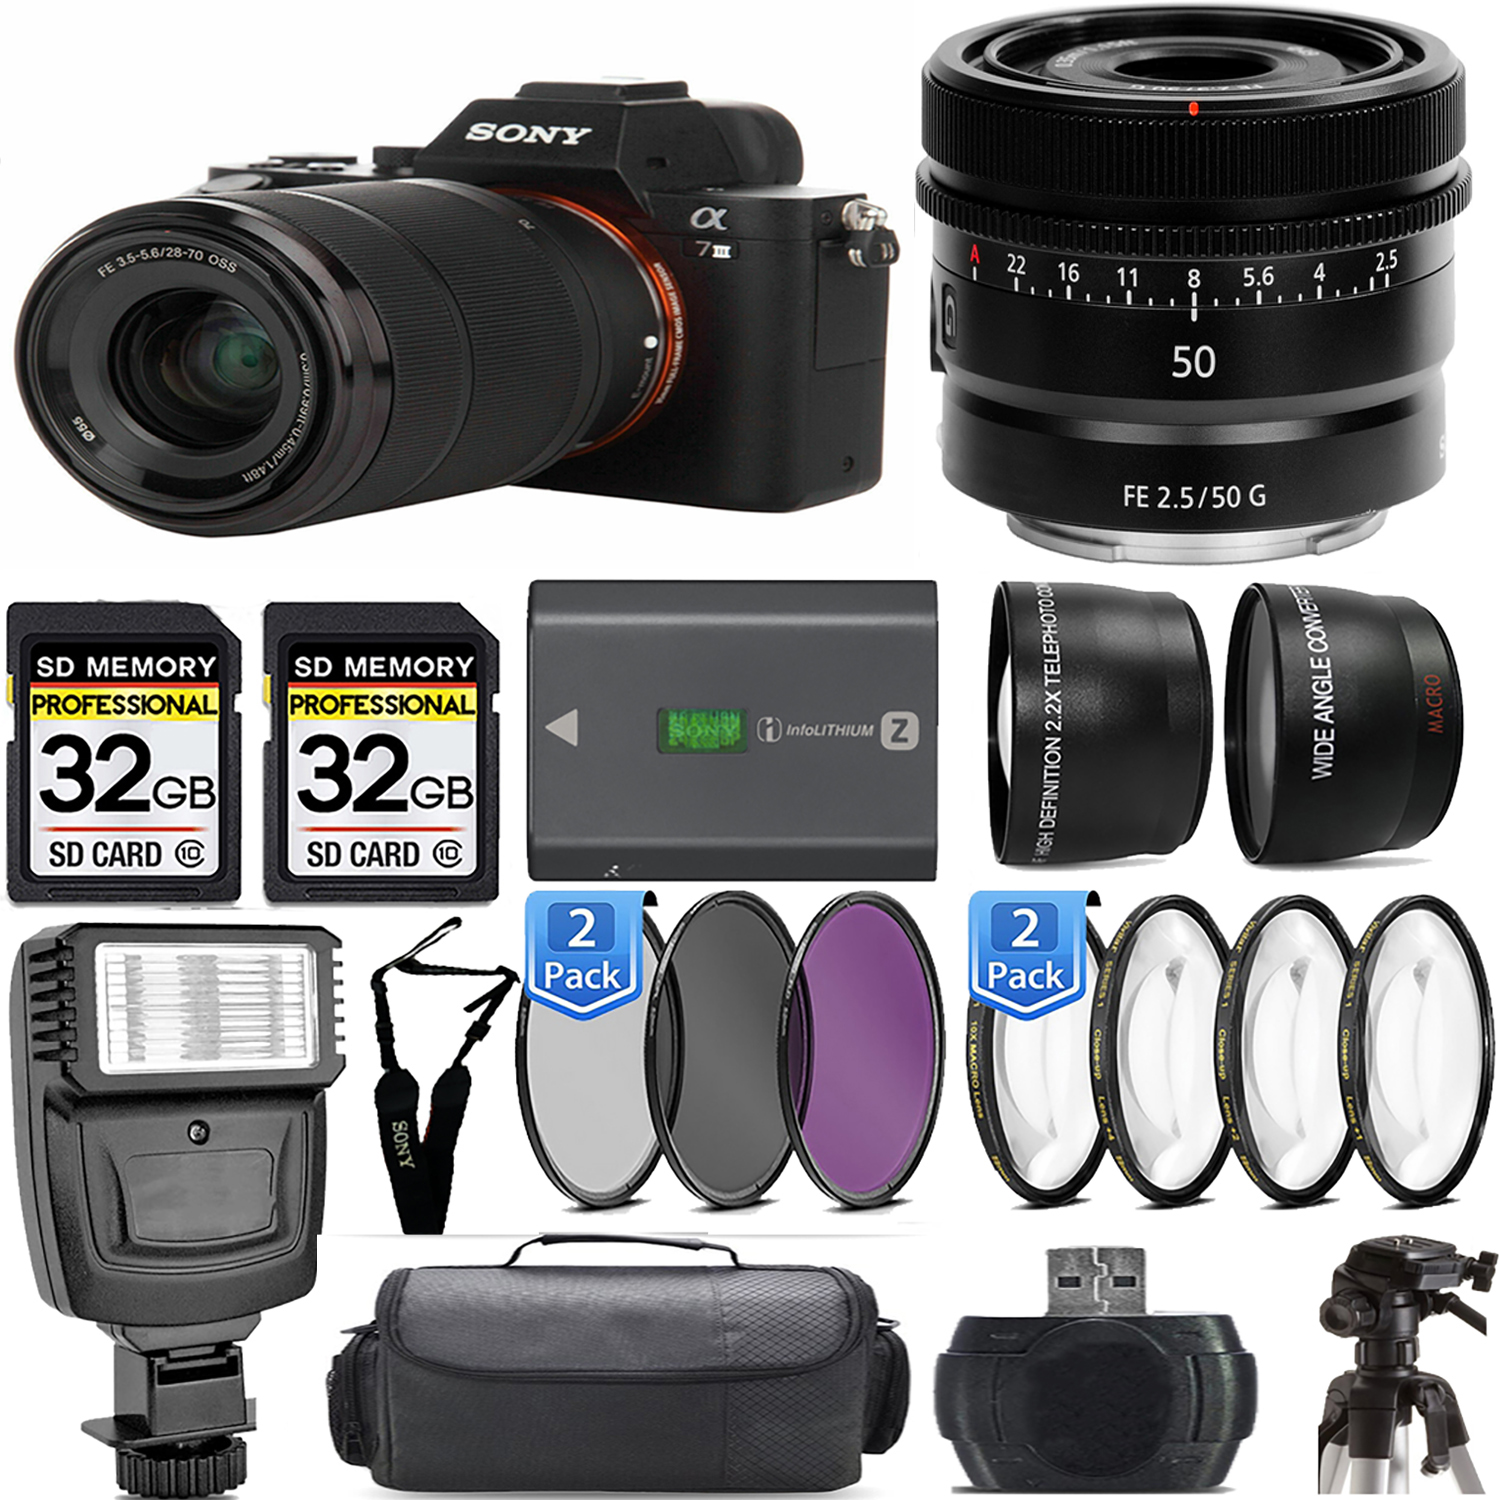 a7 III  Camera + 28-70mm Lens + 50mm Lens + Flash + Extra Battery - Kit *FREE SHIPPING*